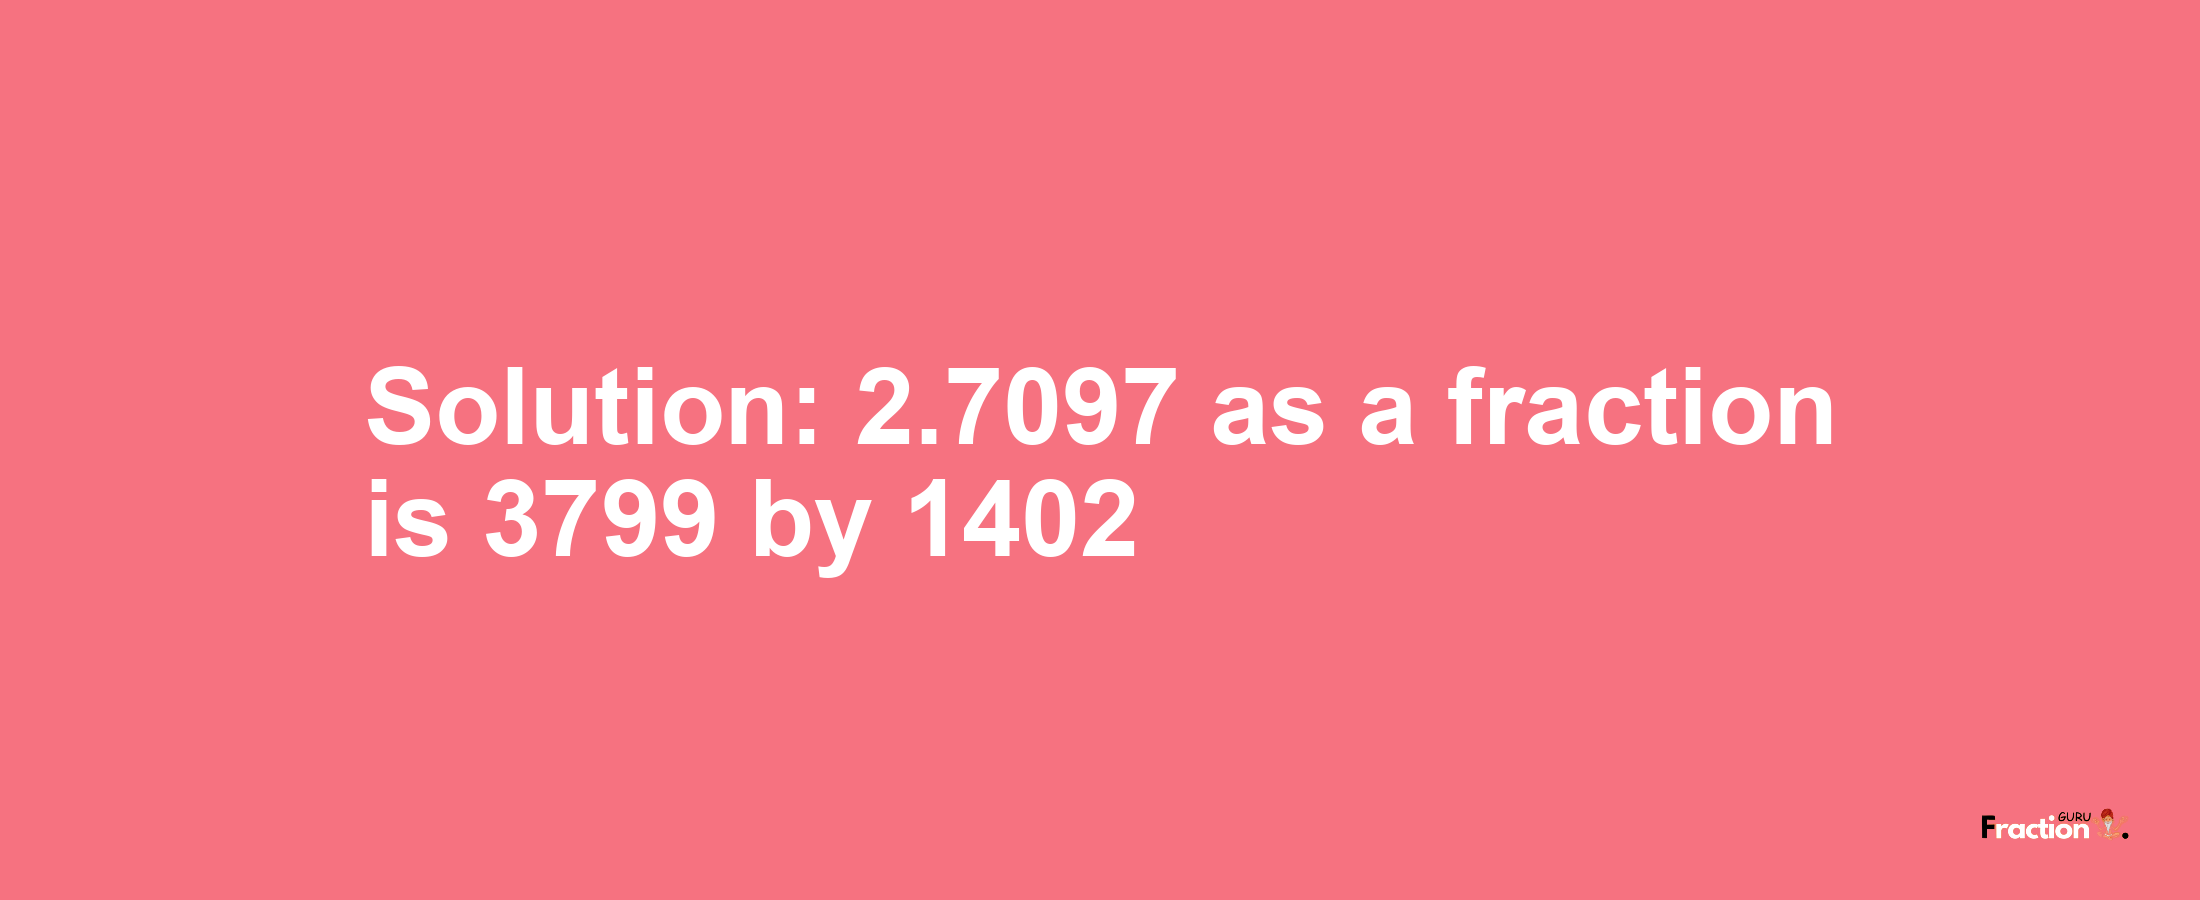 Solution:2.7097 as a fraction is 3799/1402